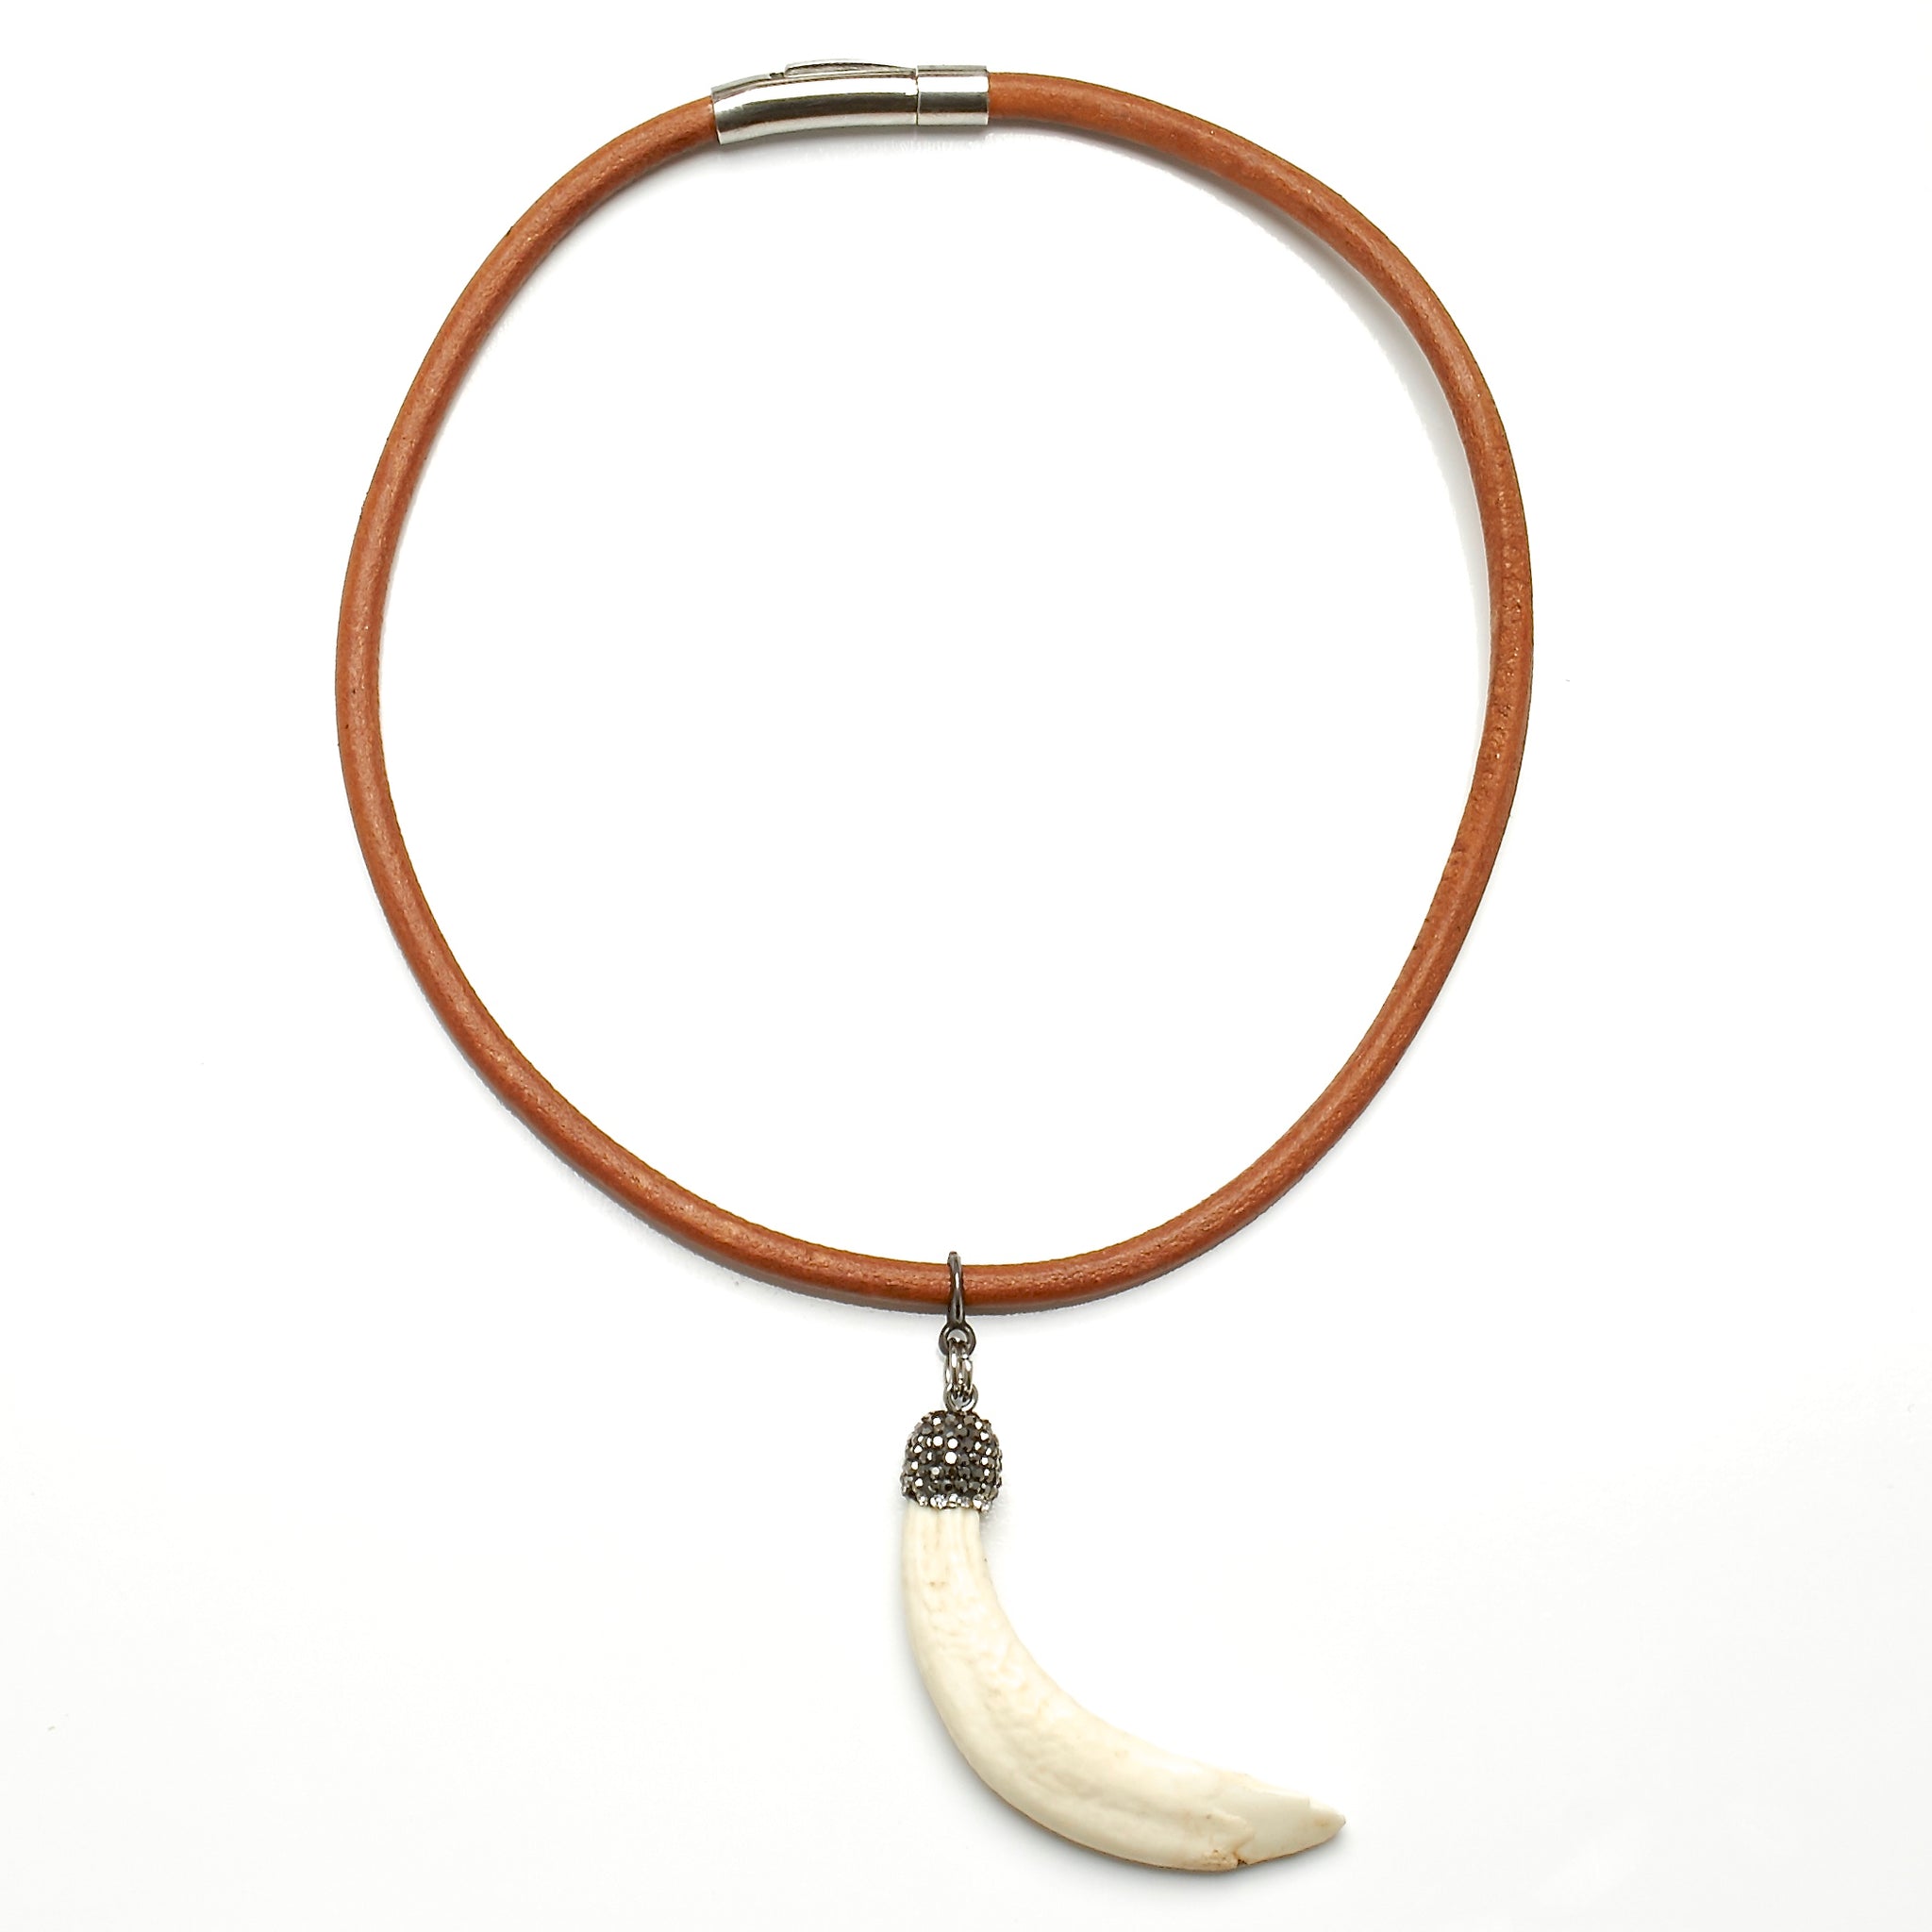 Sold at Auction: DAYAK TRIBE HEADHUNTER BOAR TOOTH NECKLACE